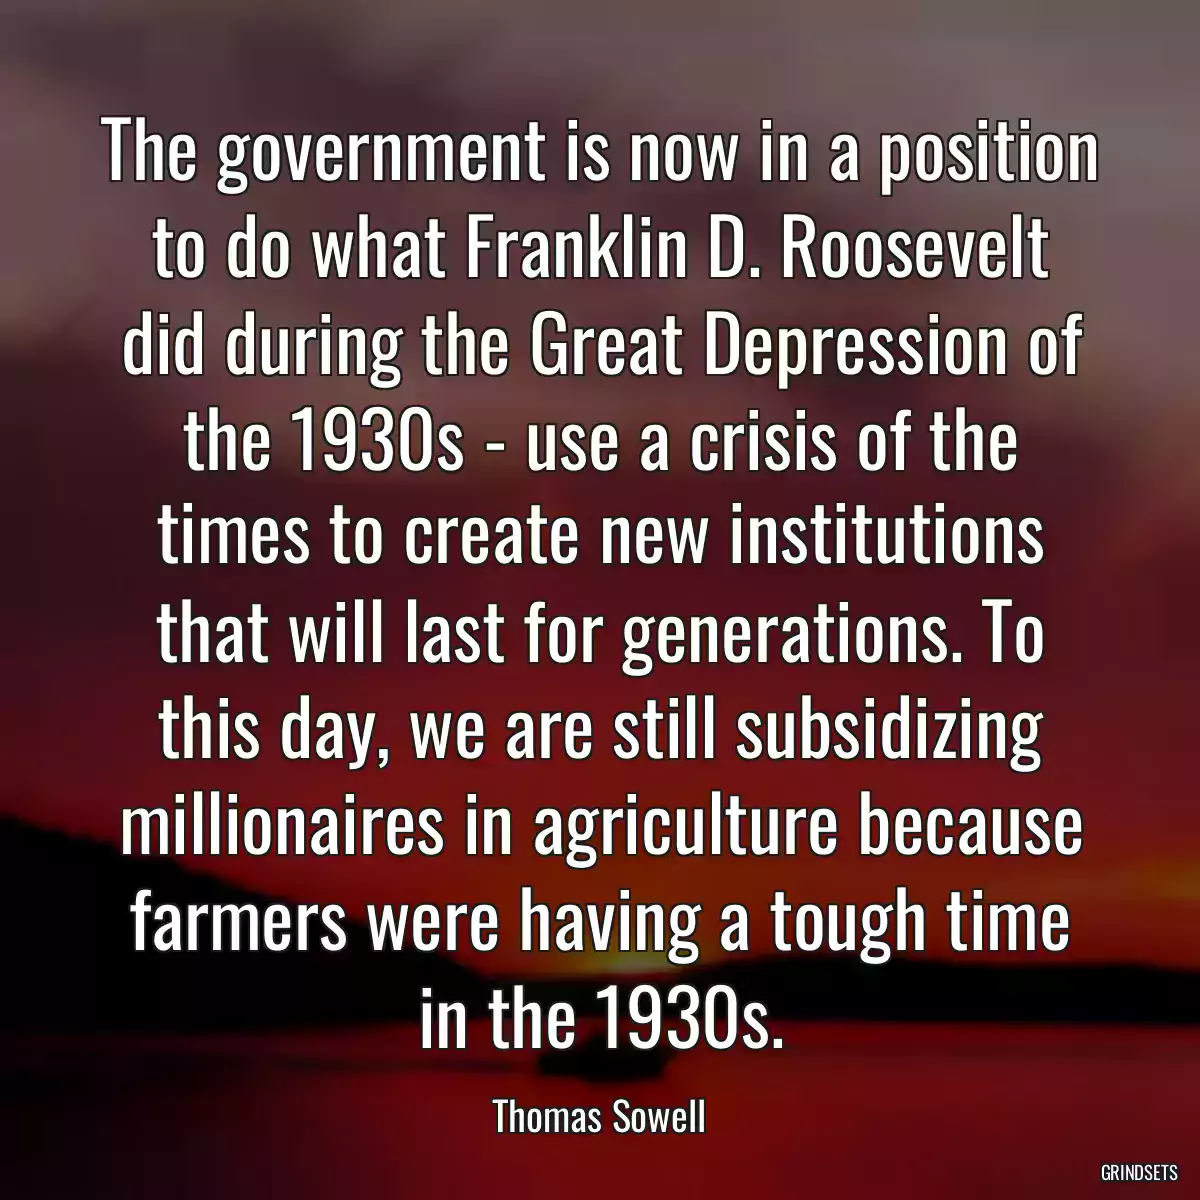 The government is now in a position to do what Franklin D. Roosevelt did during the Great Depression of the 1930s - use a crisis of the times to create new institutions that will last for generations. To this day, we are still subsidizing millionaires in agriculture because farmers were having a tough time in the 1930s.